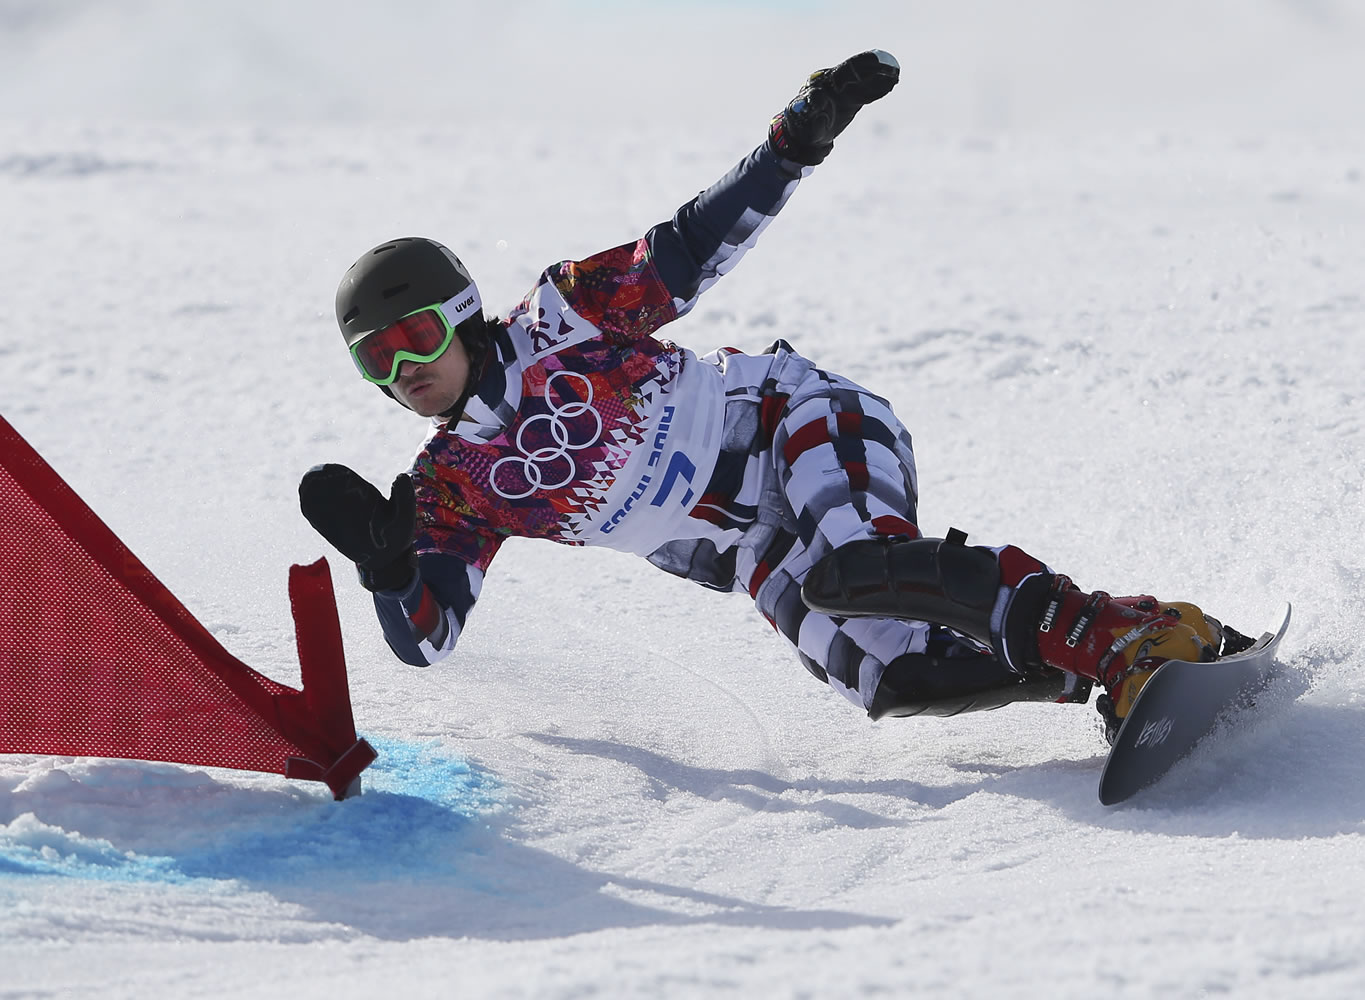 Russia's Vic Wild, a native of White Salmon, Wash., competes on the way to winning the men's snowboard parallel giant slalom semifinal at the Rosa Khutor Extreme Park on  Wednesday in Krasnaya Polyana, Russia.